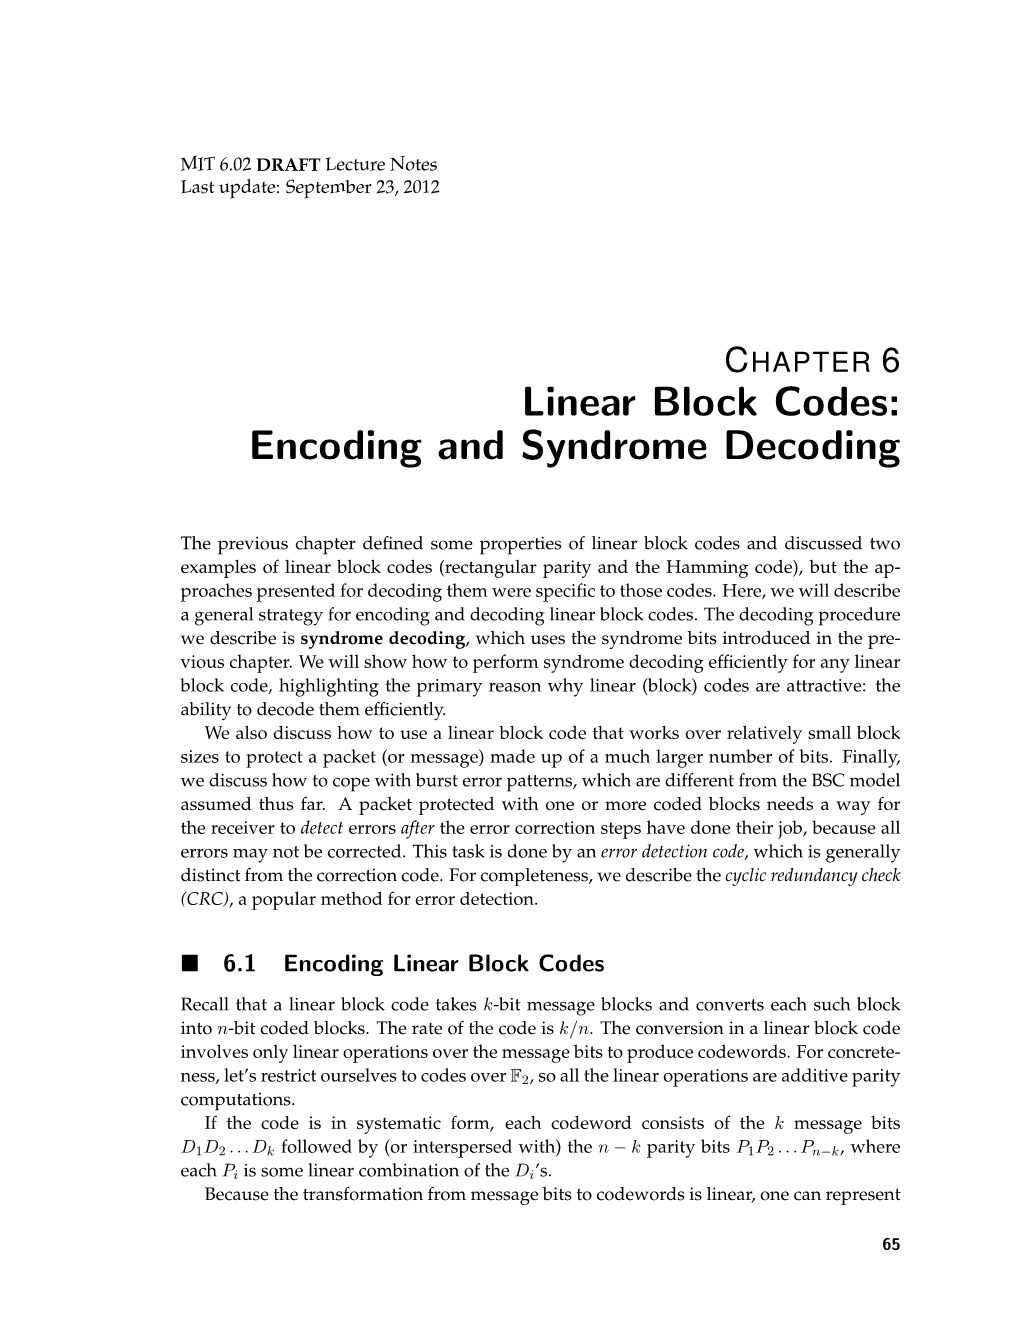 Linear Block Codes: Encoding and Syndrome Decoding